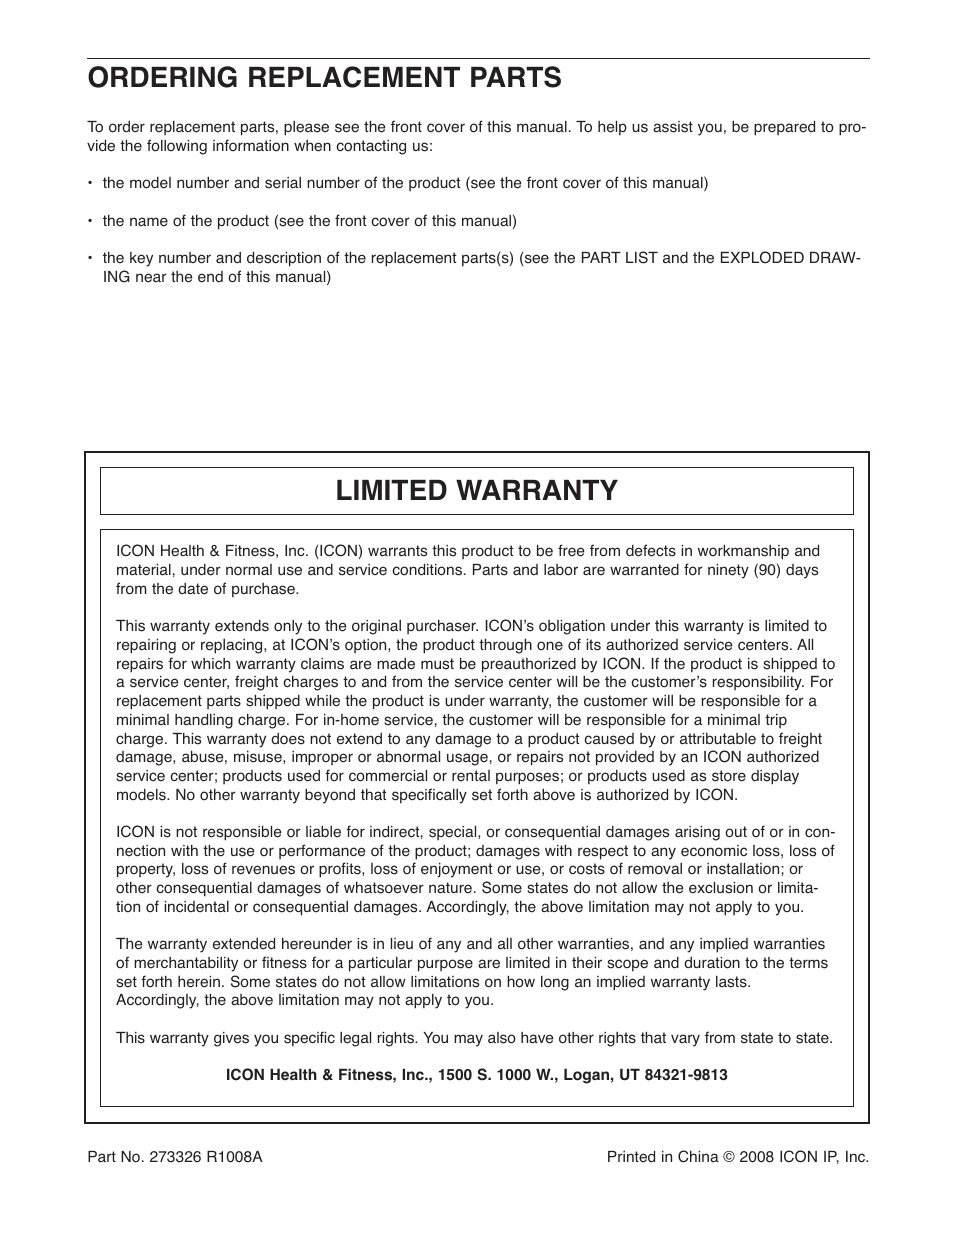 Ordering replacement parts, Limited warranty | Weider WEBE0878.0 User Manual | Page 20 / 20